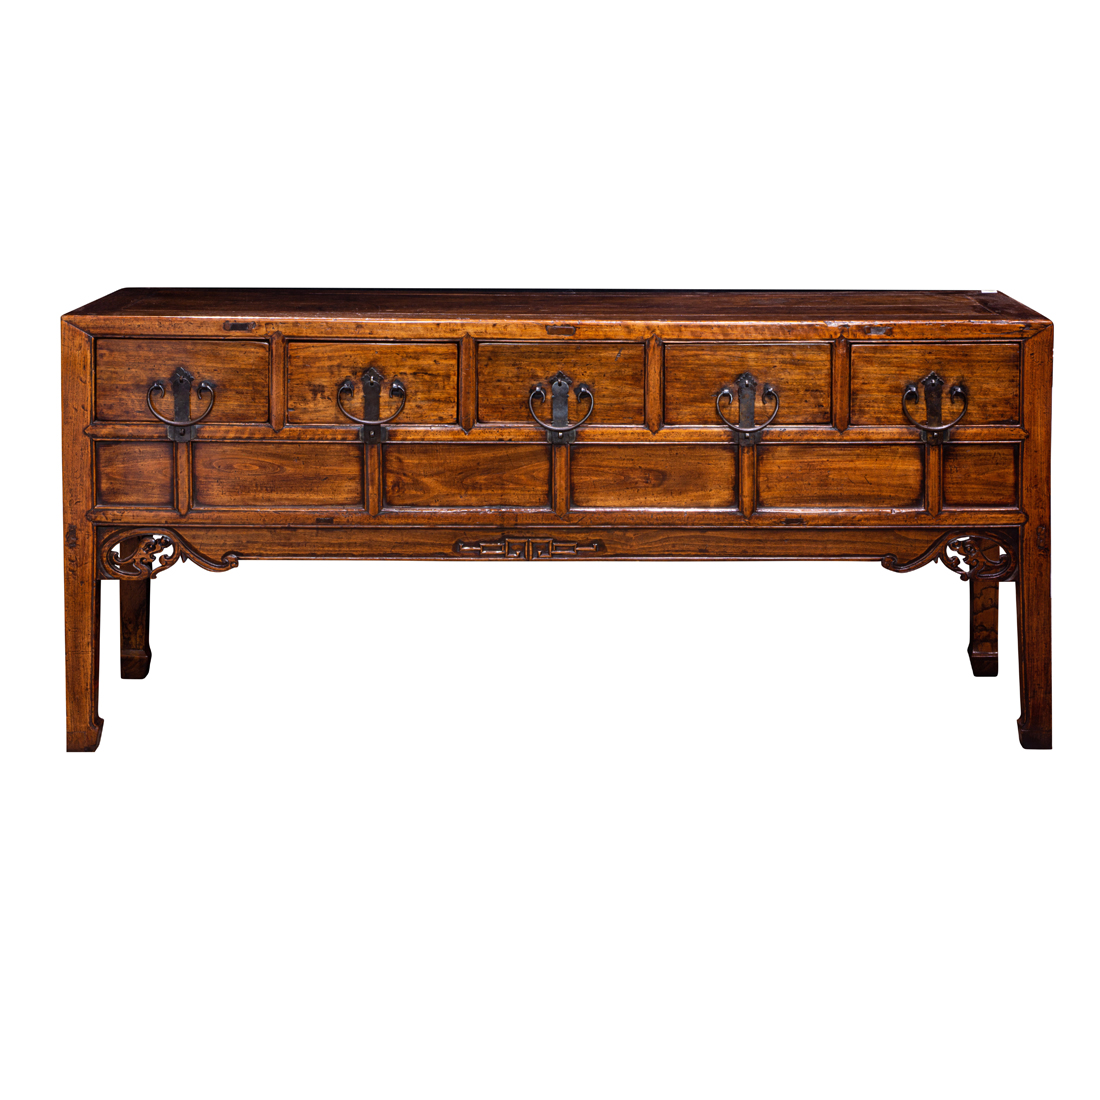 CHINESE ELM ALTAR STYLE SIDEBOARD,